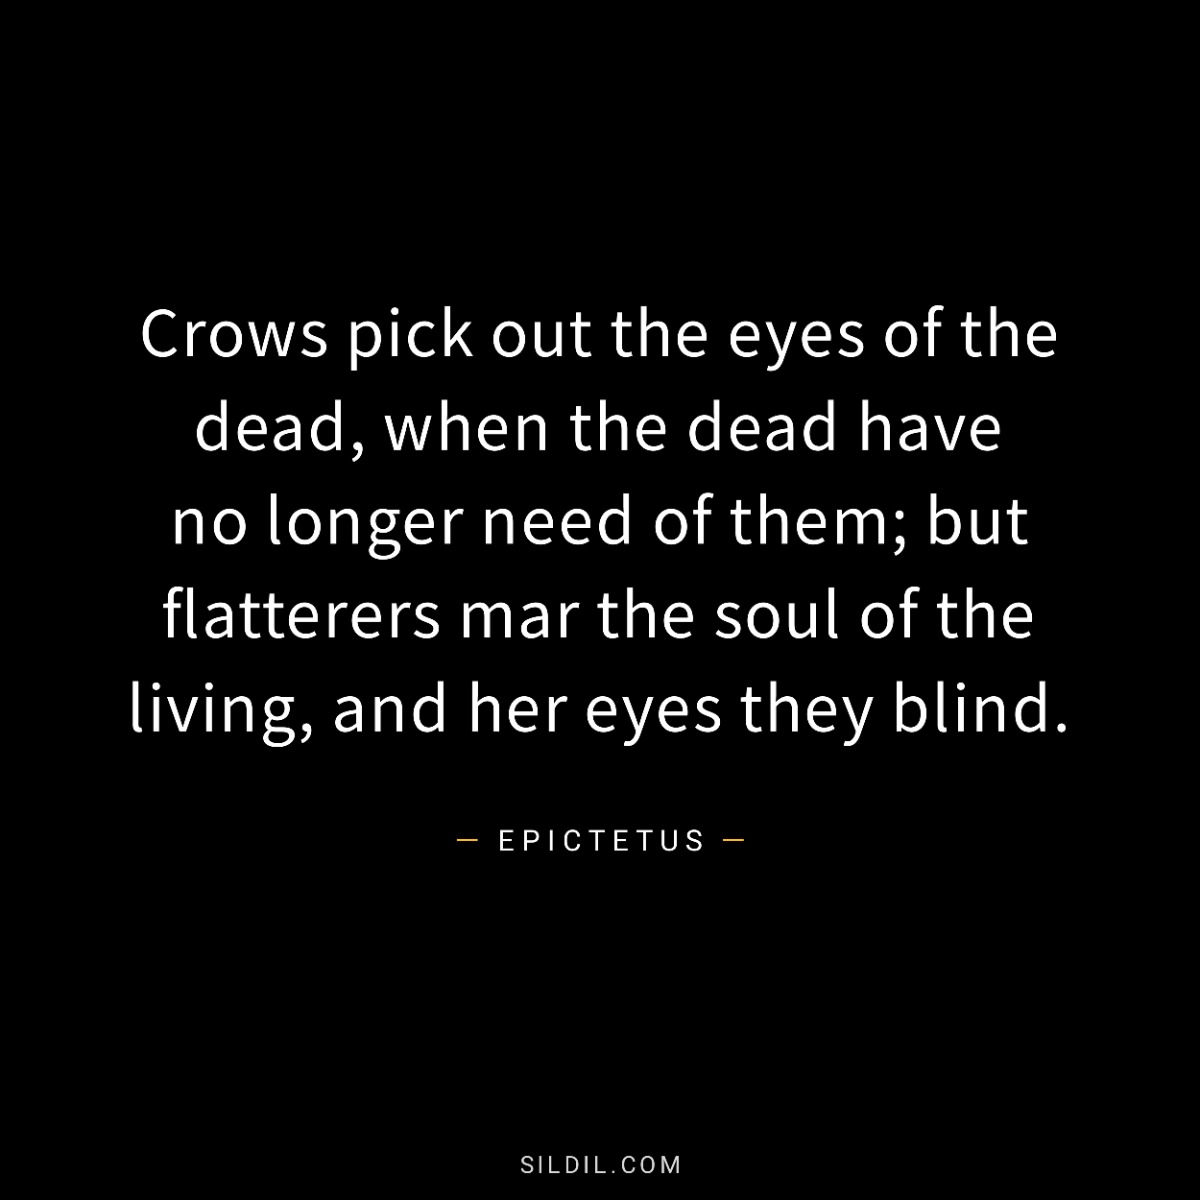 Crows pick out the eyes of the dead, when the dead have no longer need of them; but flatterers mar the soul of the living, and her eyes they blind.